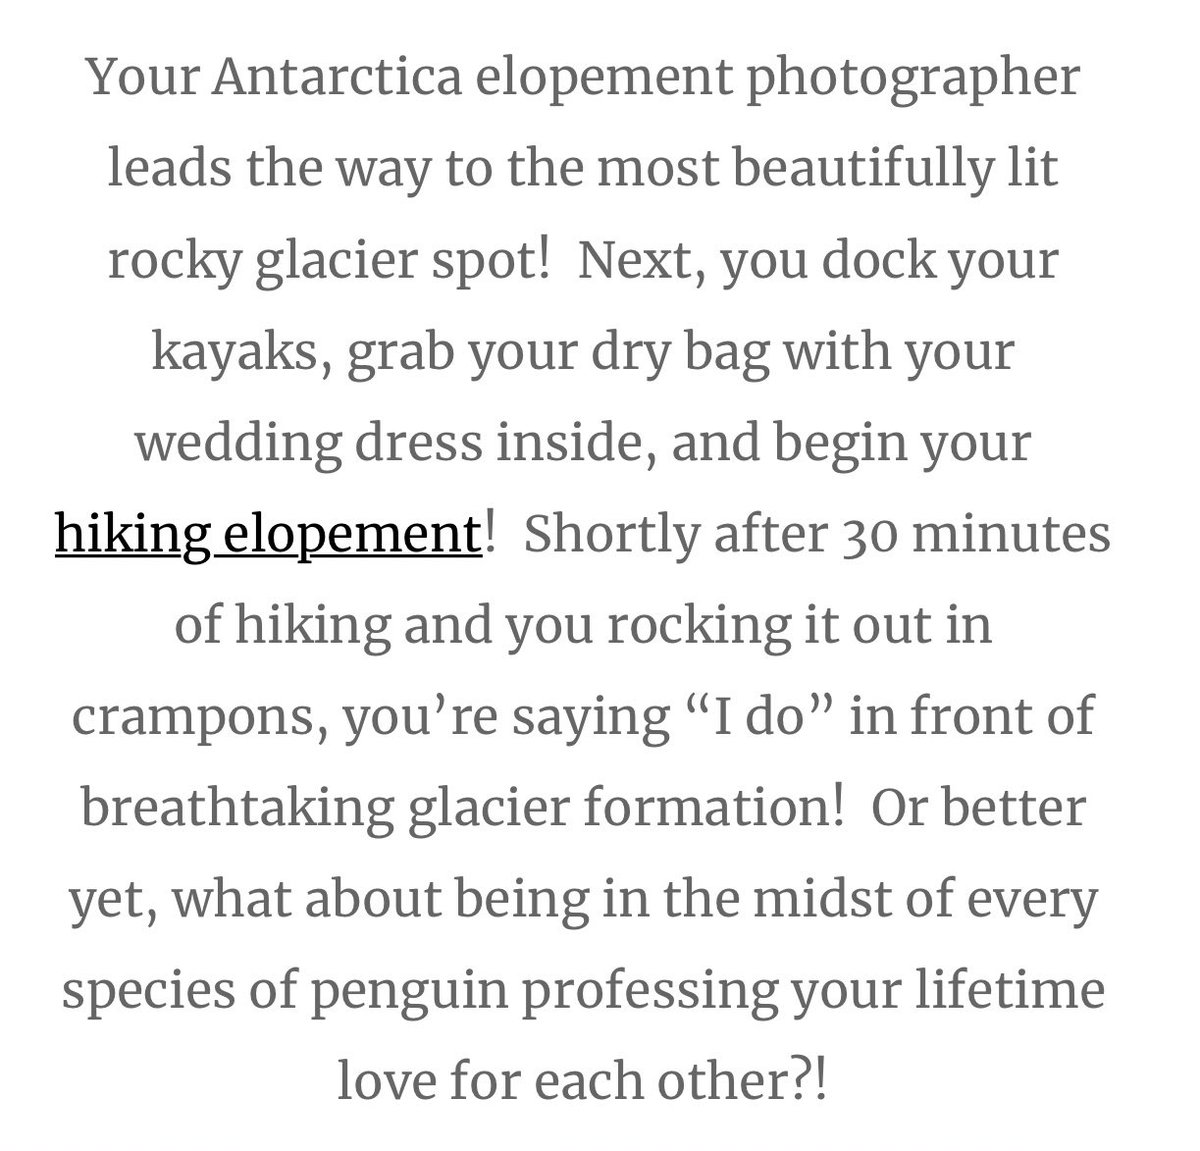 1. Christ I hate this 2. More than half of the world’s species of penguins live only outside Antarctica you absolute dumbass get rekt  https://www.smithsonianmag.com/science-nature/five-favorite-penguins-outside-antarctica-15436252/